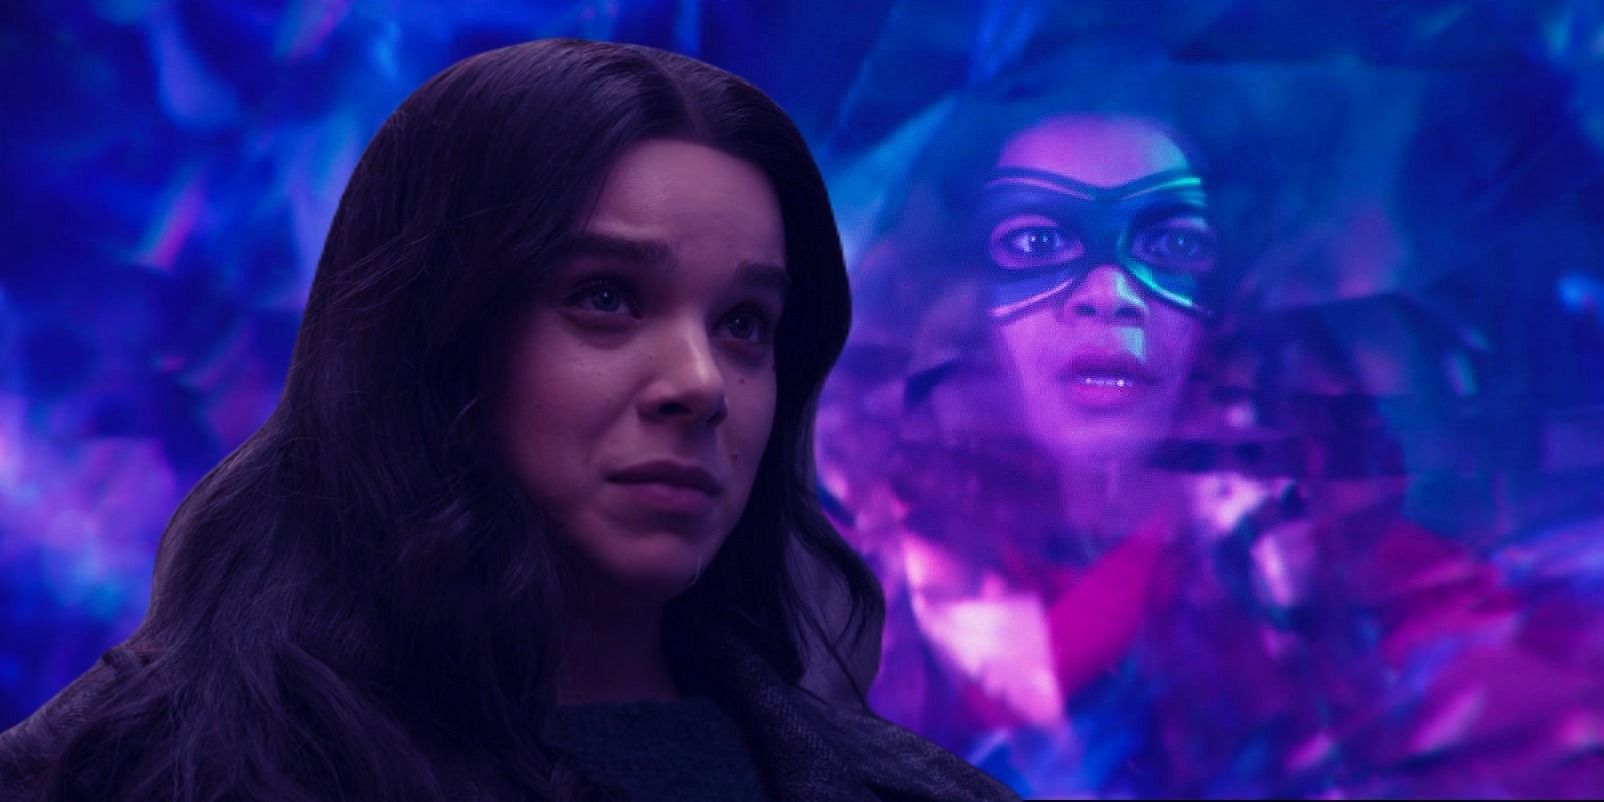 Kamala Khan as Ms Marvel looking surprised surrounded by her power and Kate Bishop in Hawkeye in the foreground looking on